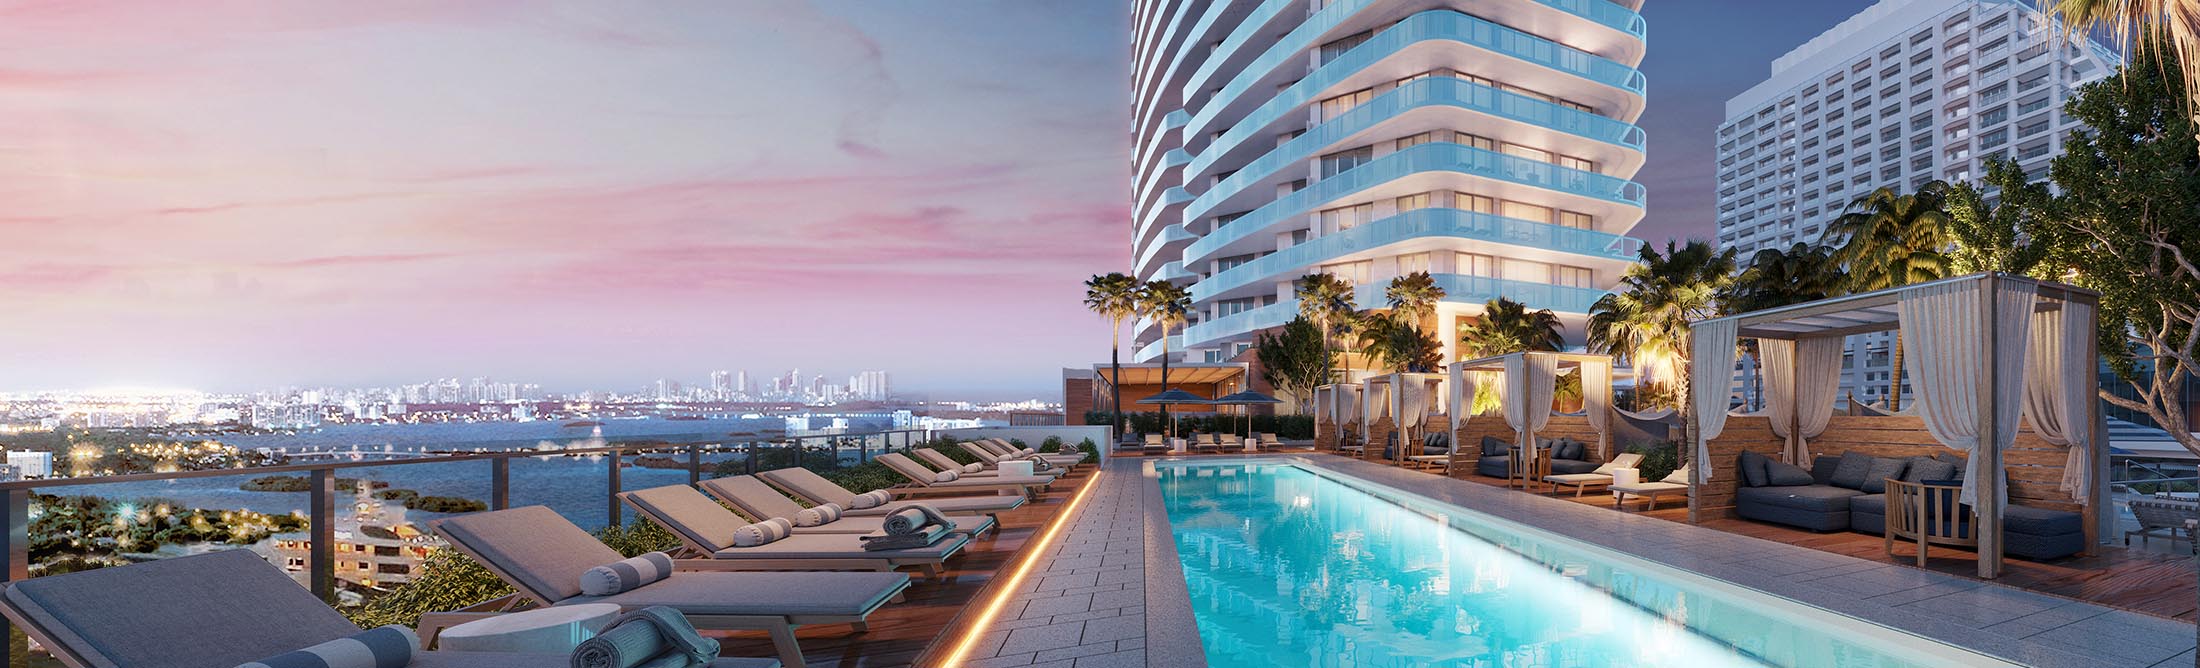 A rendering of the Four Seasons Private Residences, For Lauderdale